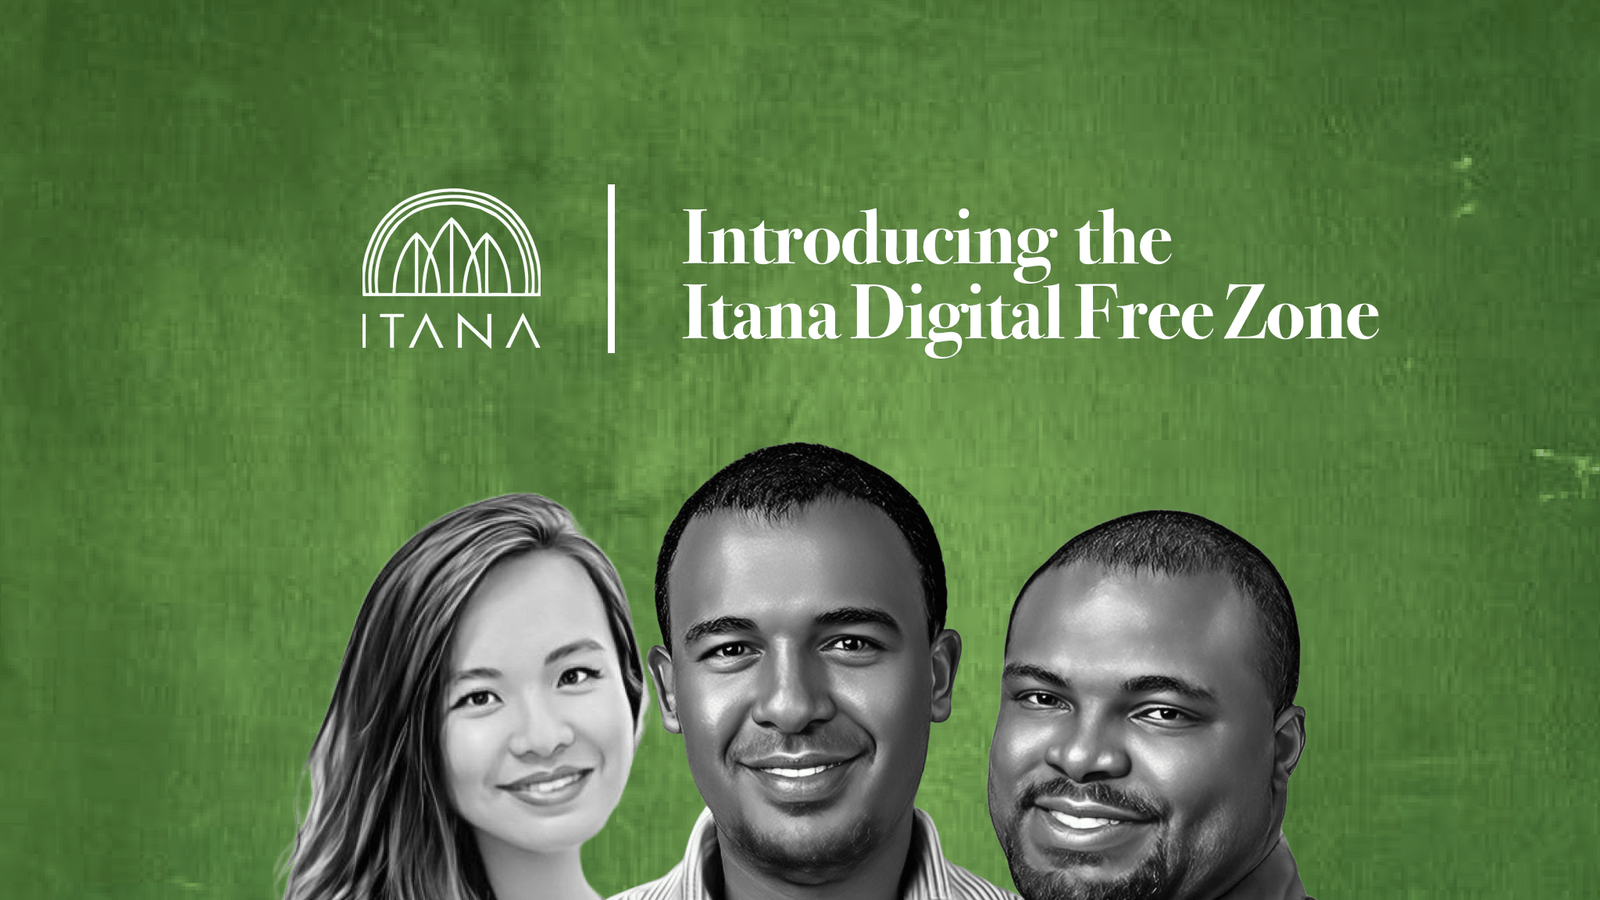 Itana (fka Talent City) raises $2M pre-seed to build Africa’s first digital free zone